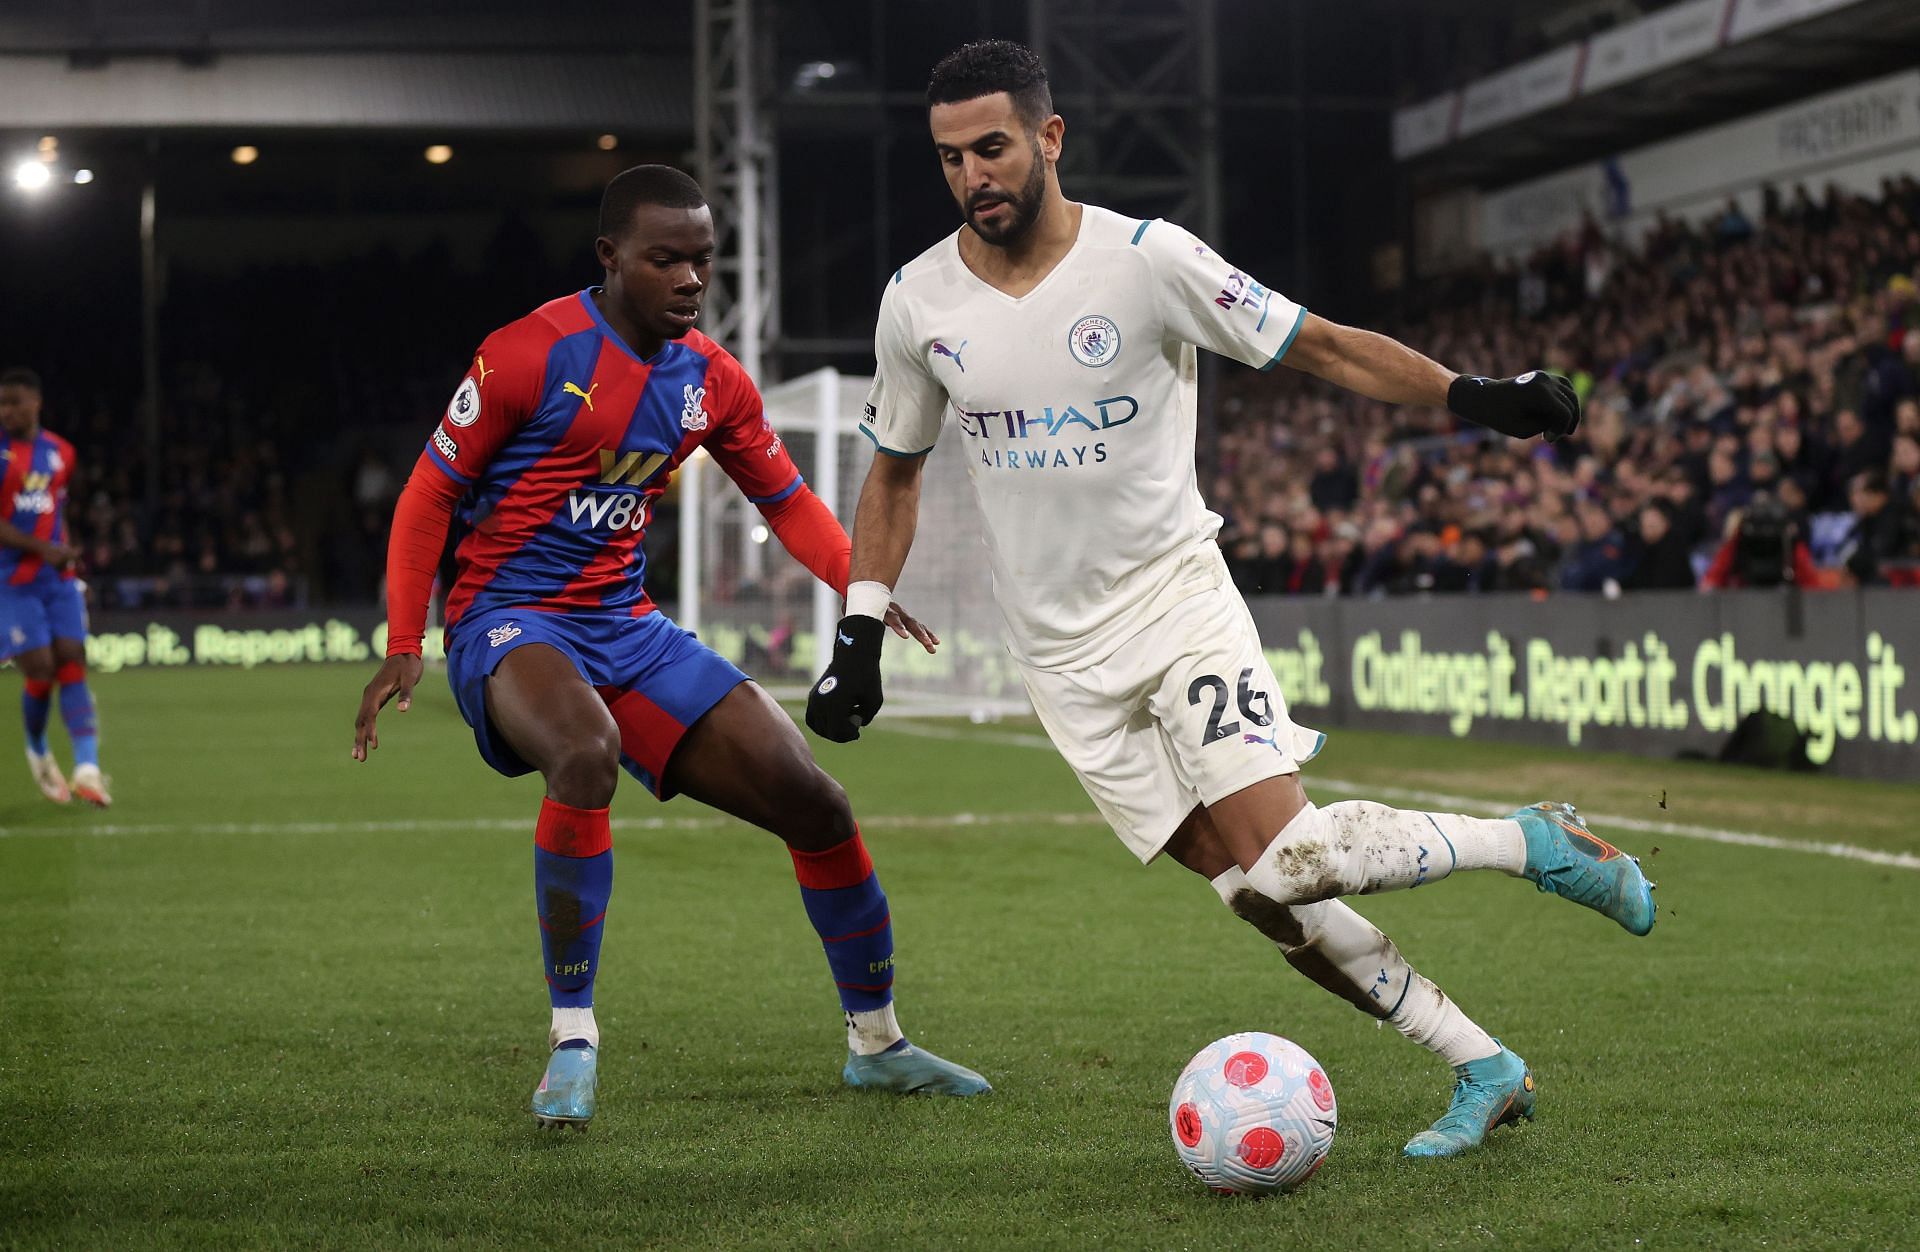 Manchester City suffered a setback against Crystal Palace on Monday.